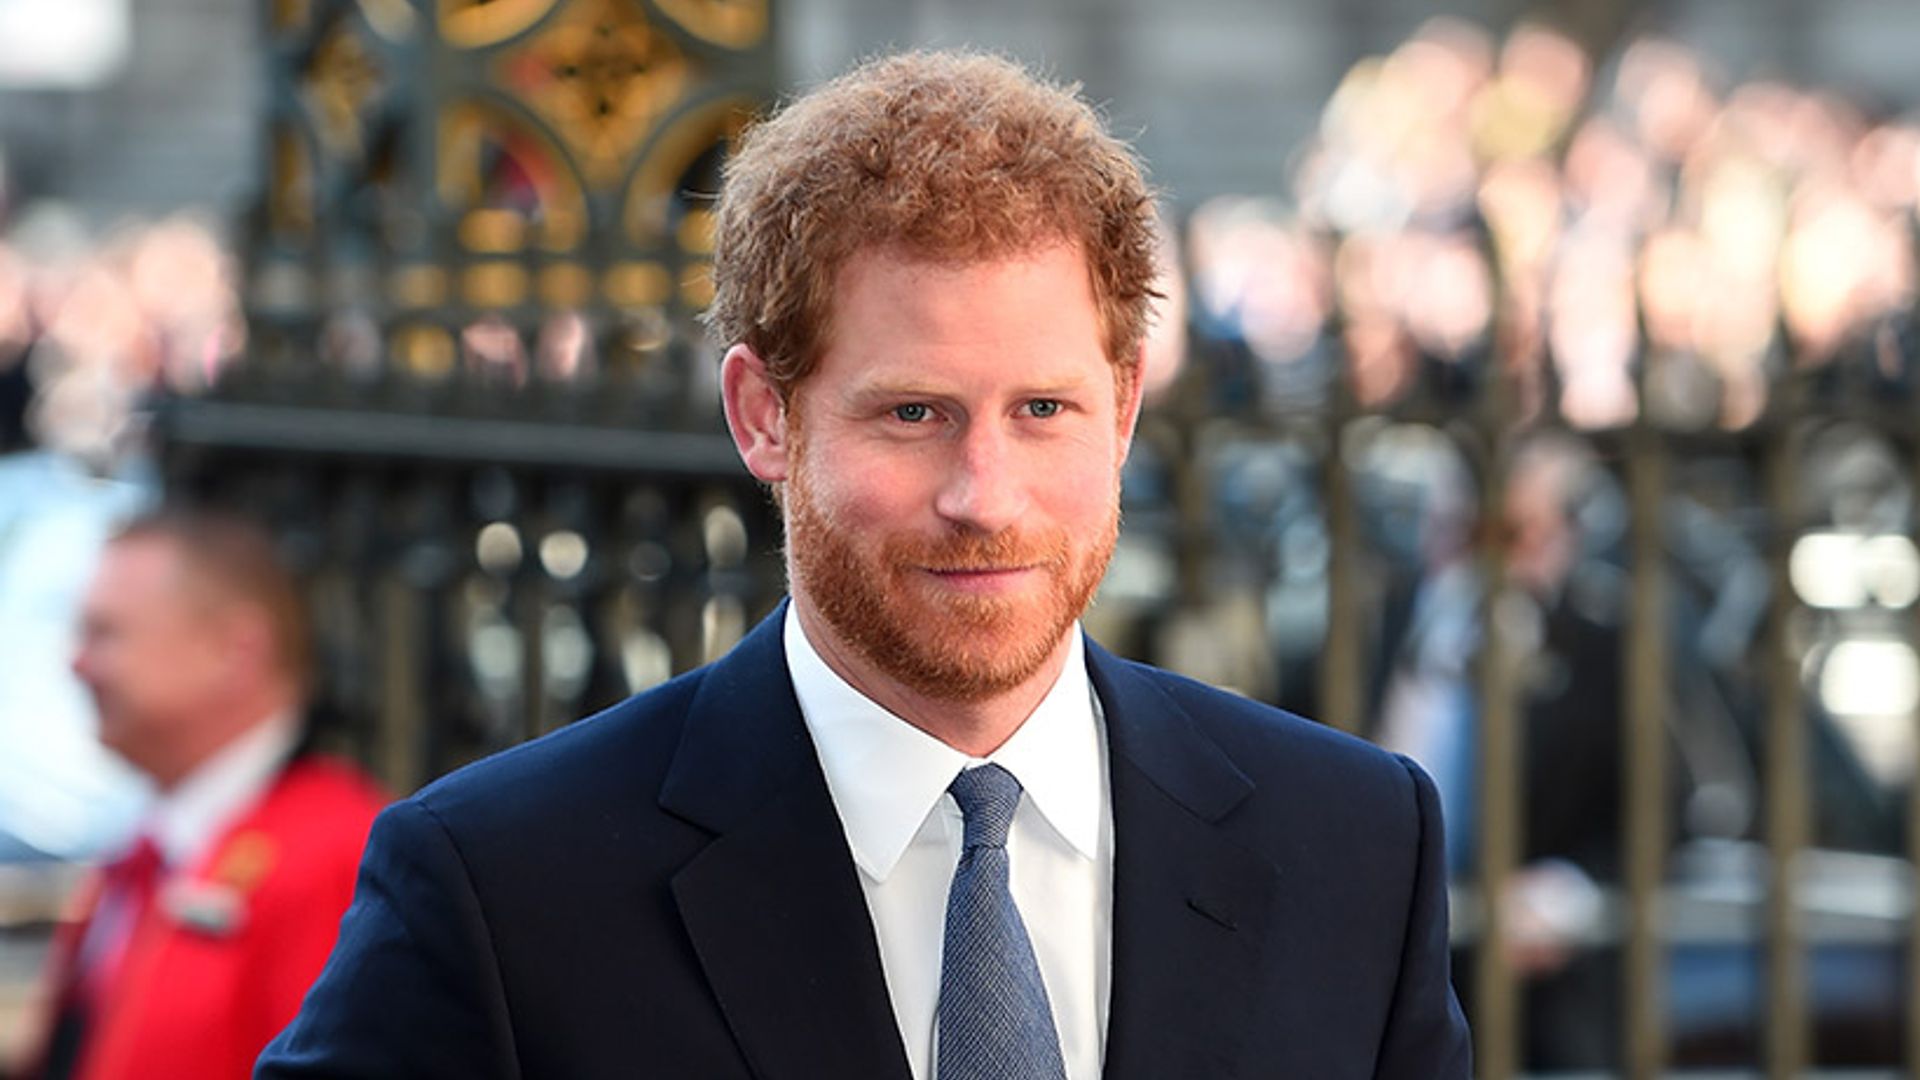 Prince Harry has been on babysitting duty – and it's the cutest thing ever